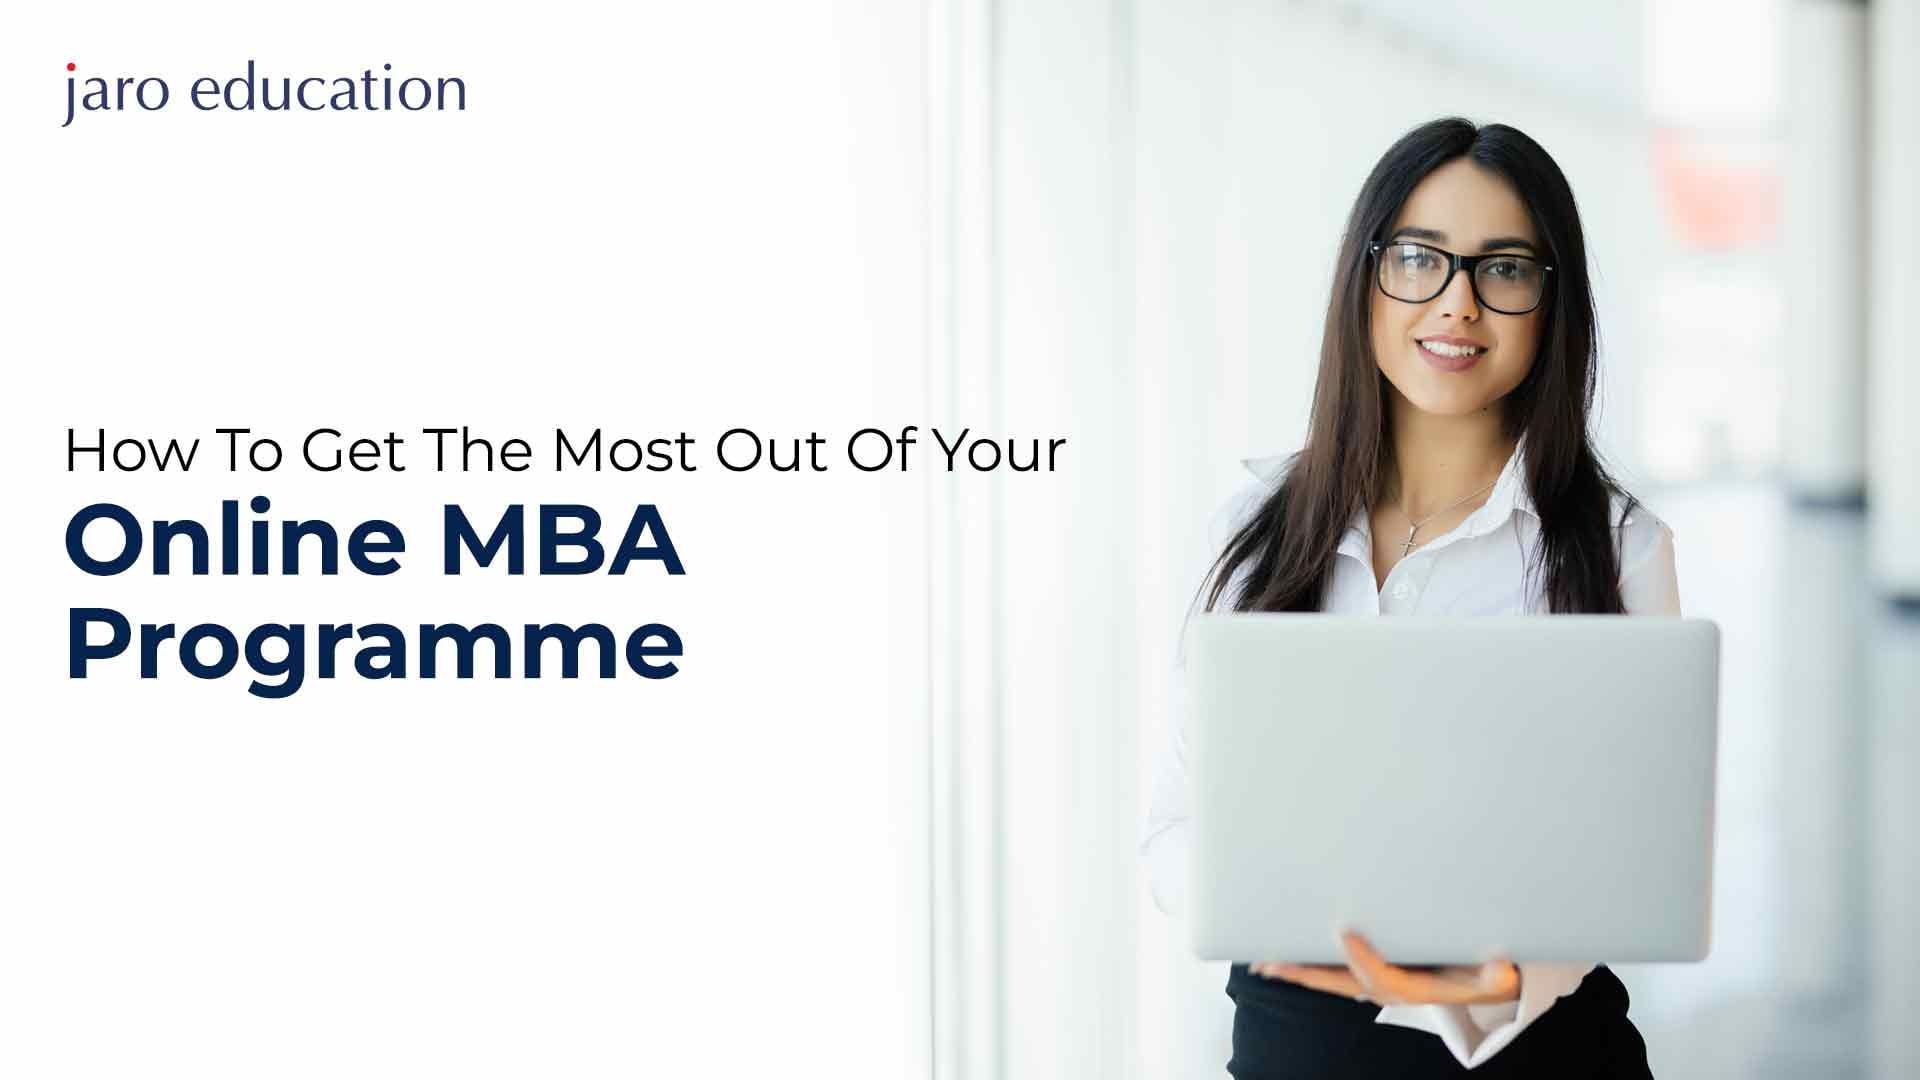 How-To-Get-The-Most-Out-Of-Your-Online-MBA-Programme_28_11zon jaro